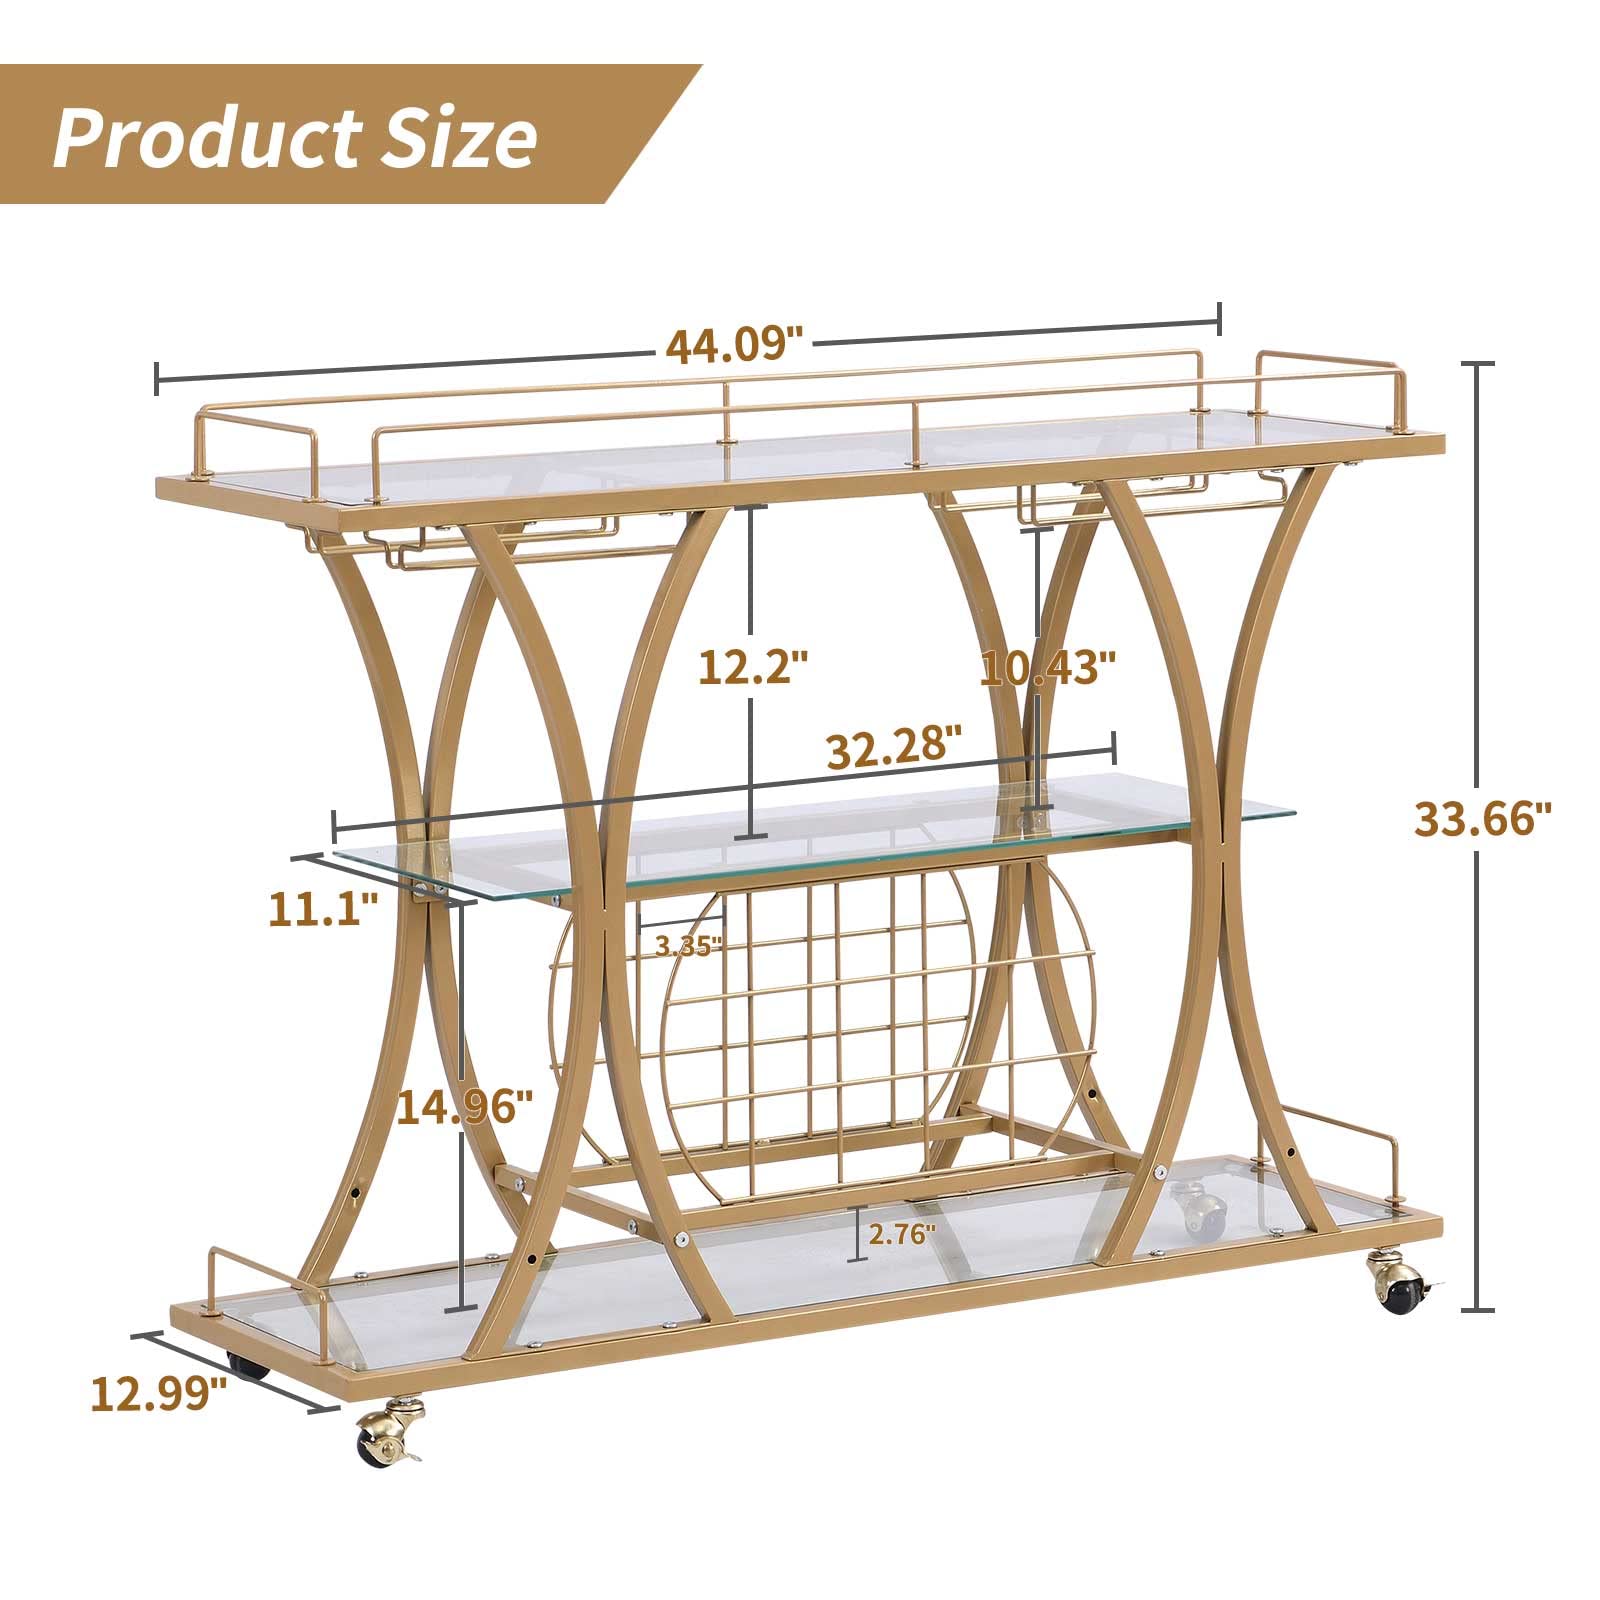 HOMYSHOPY Bar Serving Cart with Glass Holder and Wine Rack, 3-Tier Kitchen Trolley Tempered Shelves Gold-Finished Metal Frame, Mobile for Home (Gold)